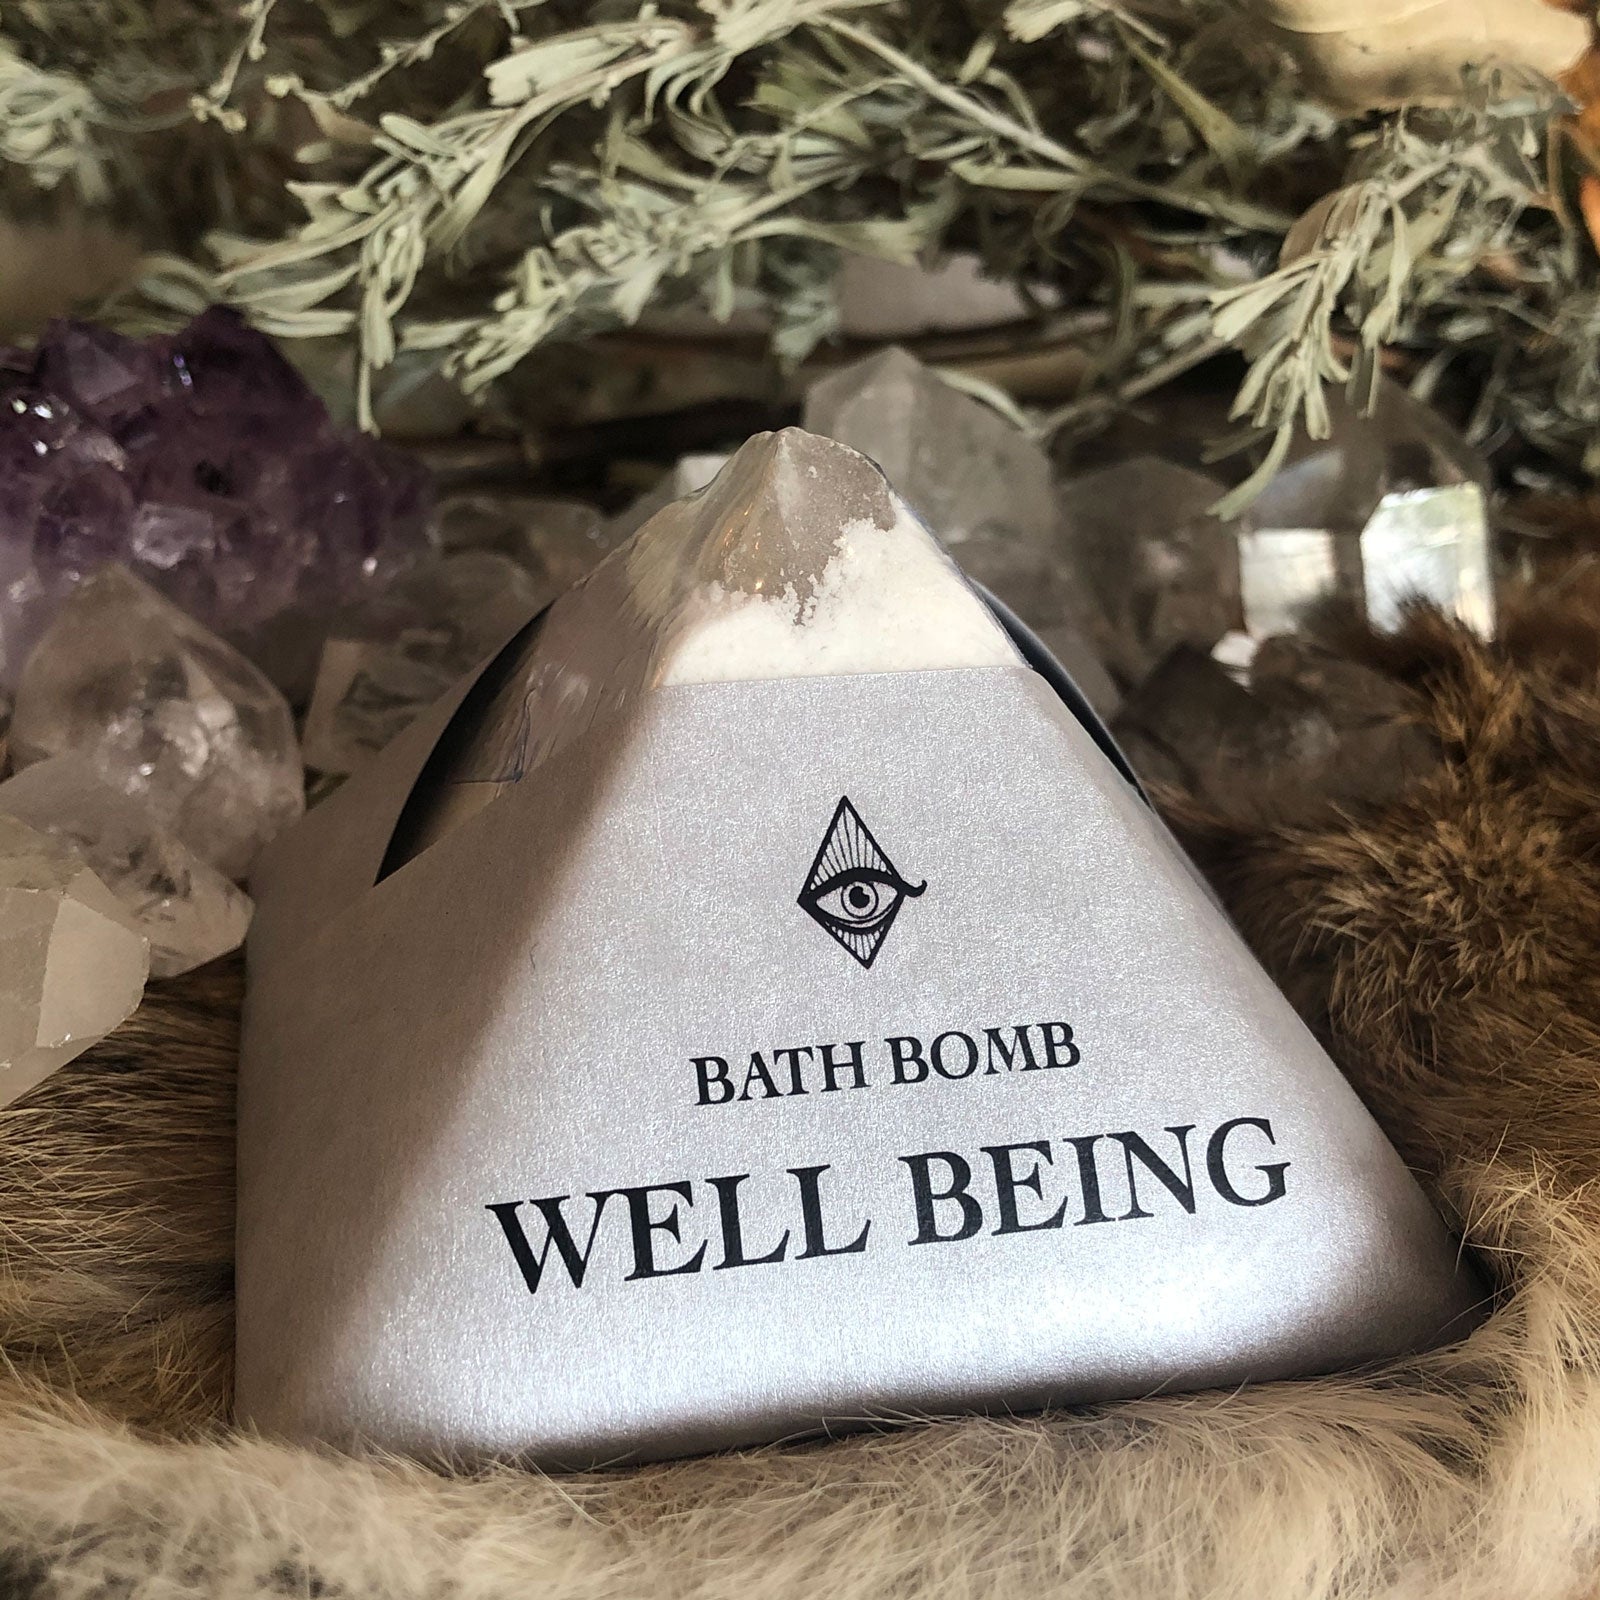 Well Being Bath-bomb with Charged Crystal